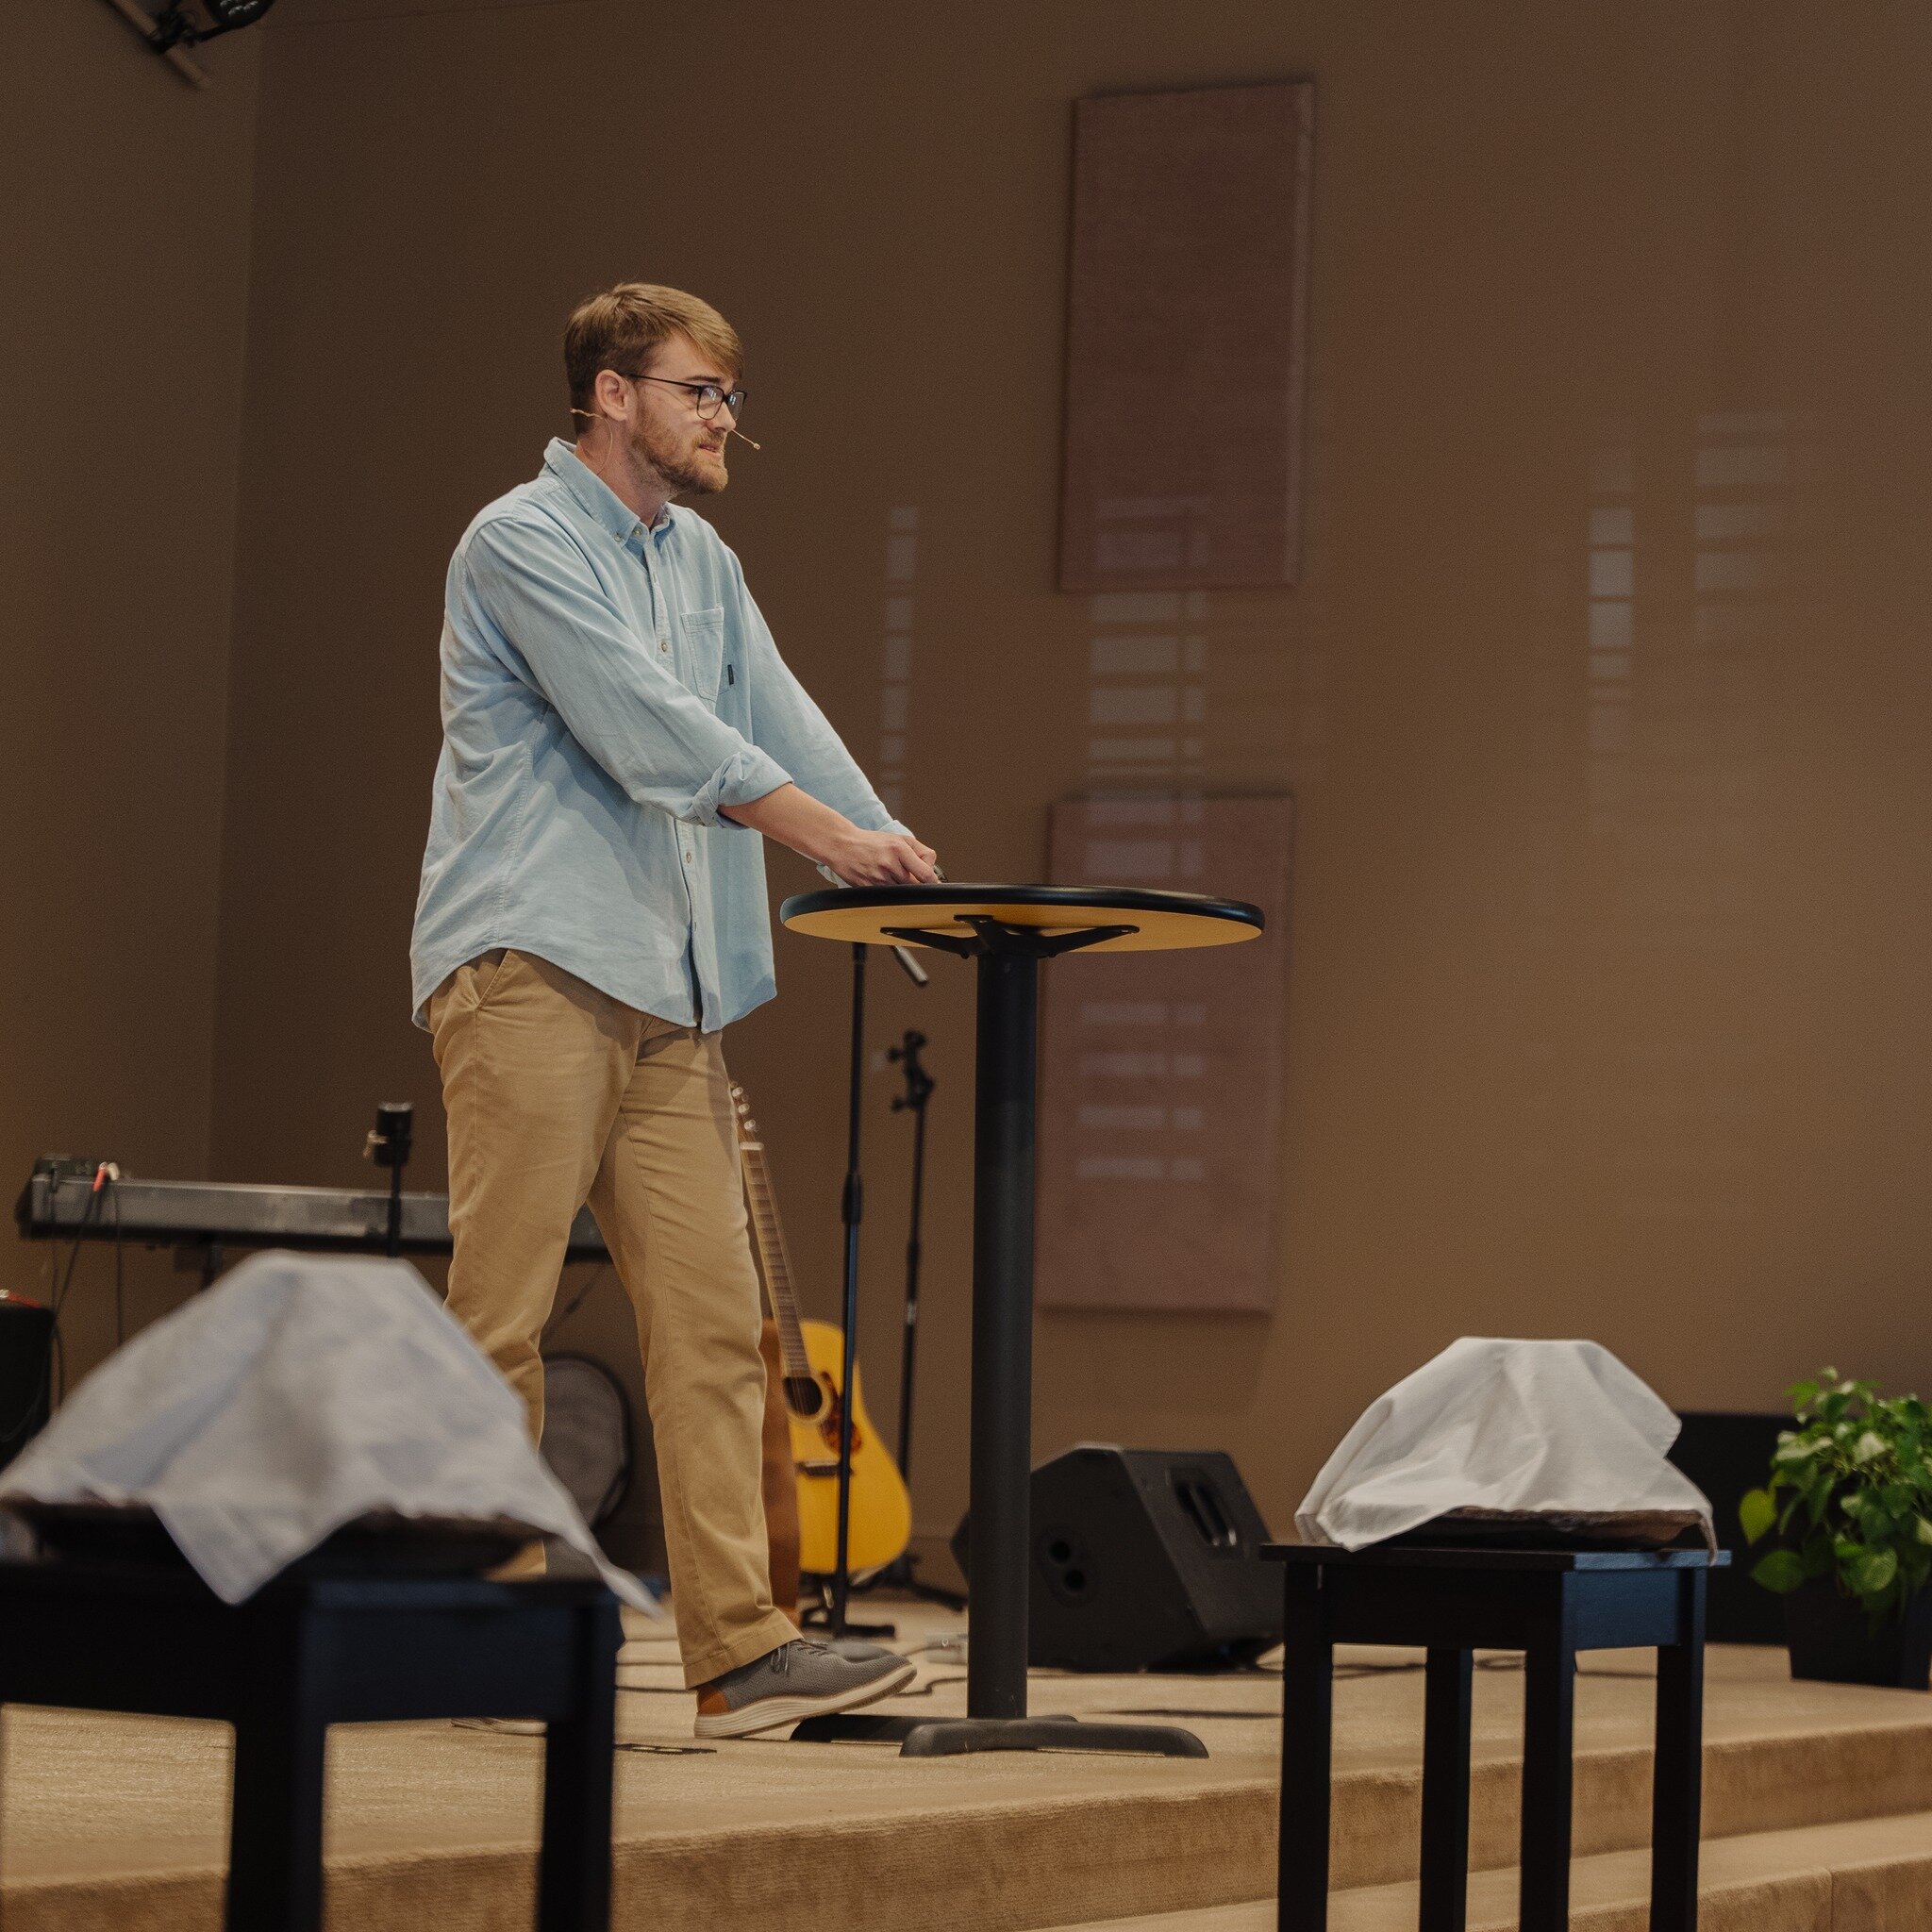 This Sunday we continued our walk through Lent as Chael led us through Matthew 4:5-7. For those who were out of town, you can still watch on Facebook live, or find us on Spotify!